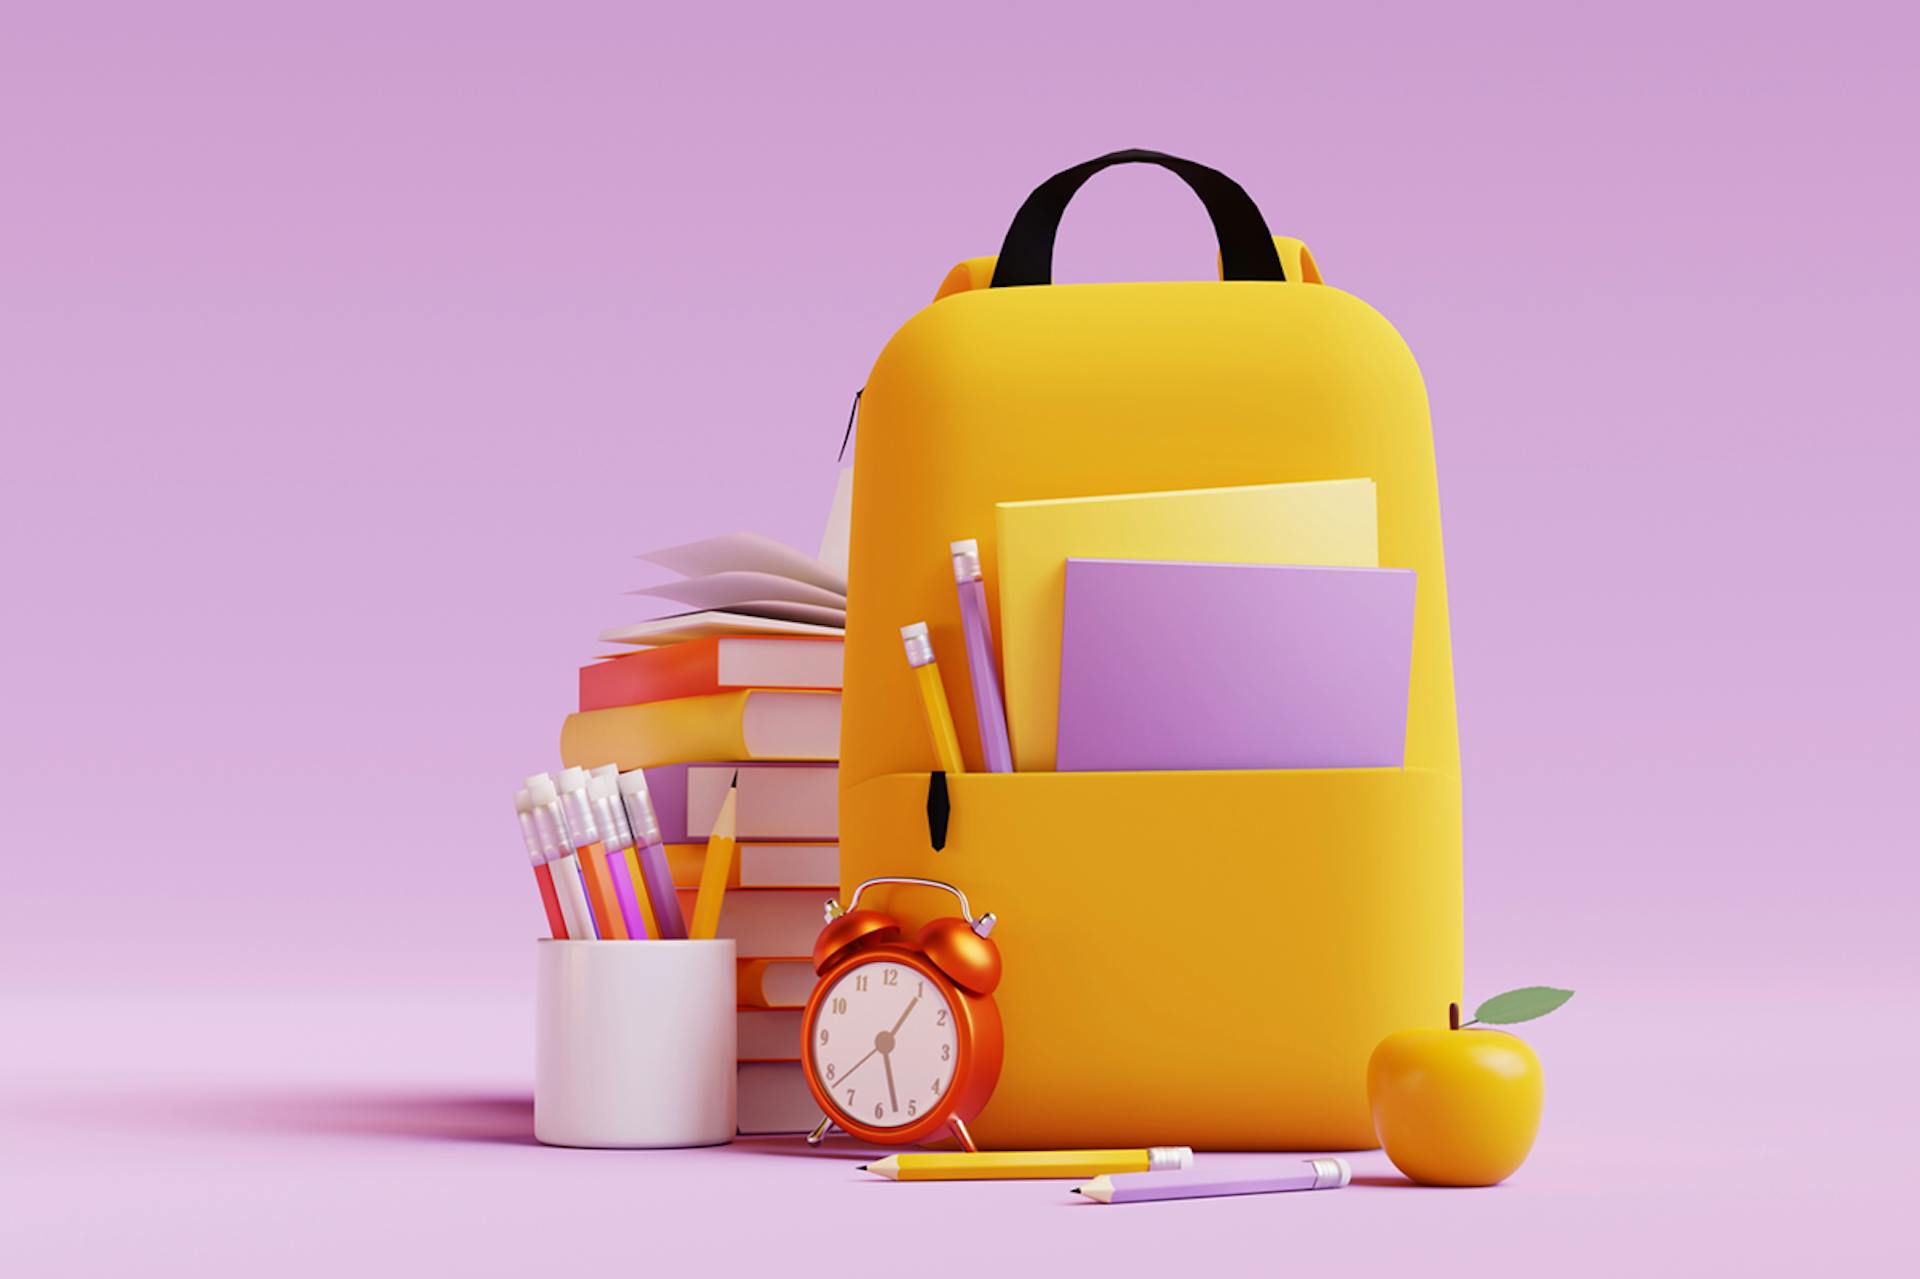 Back-to-school supplies, including a backpack, books, and pencils, against a pink background.